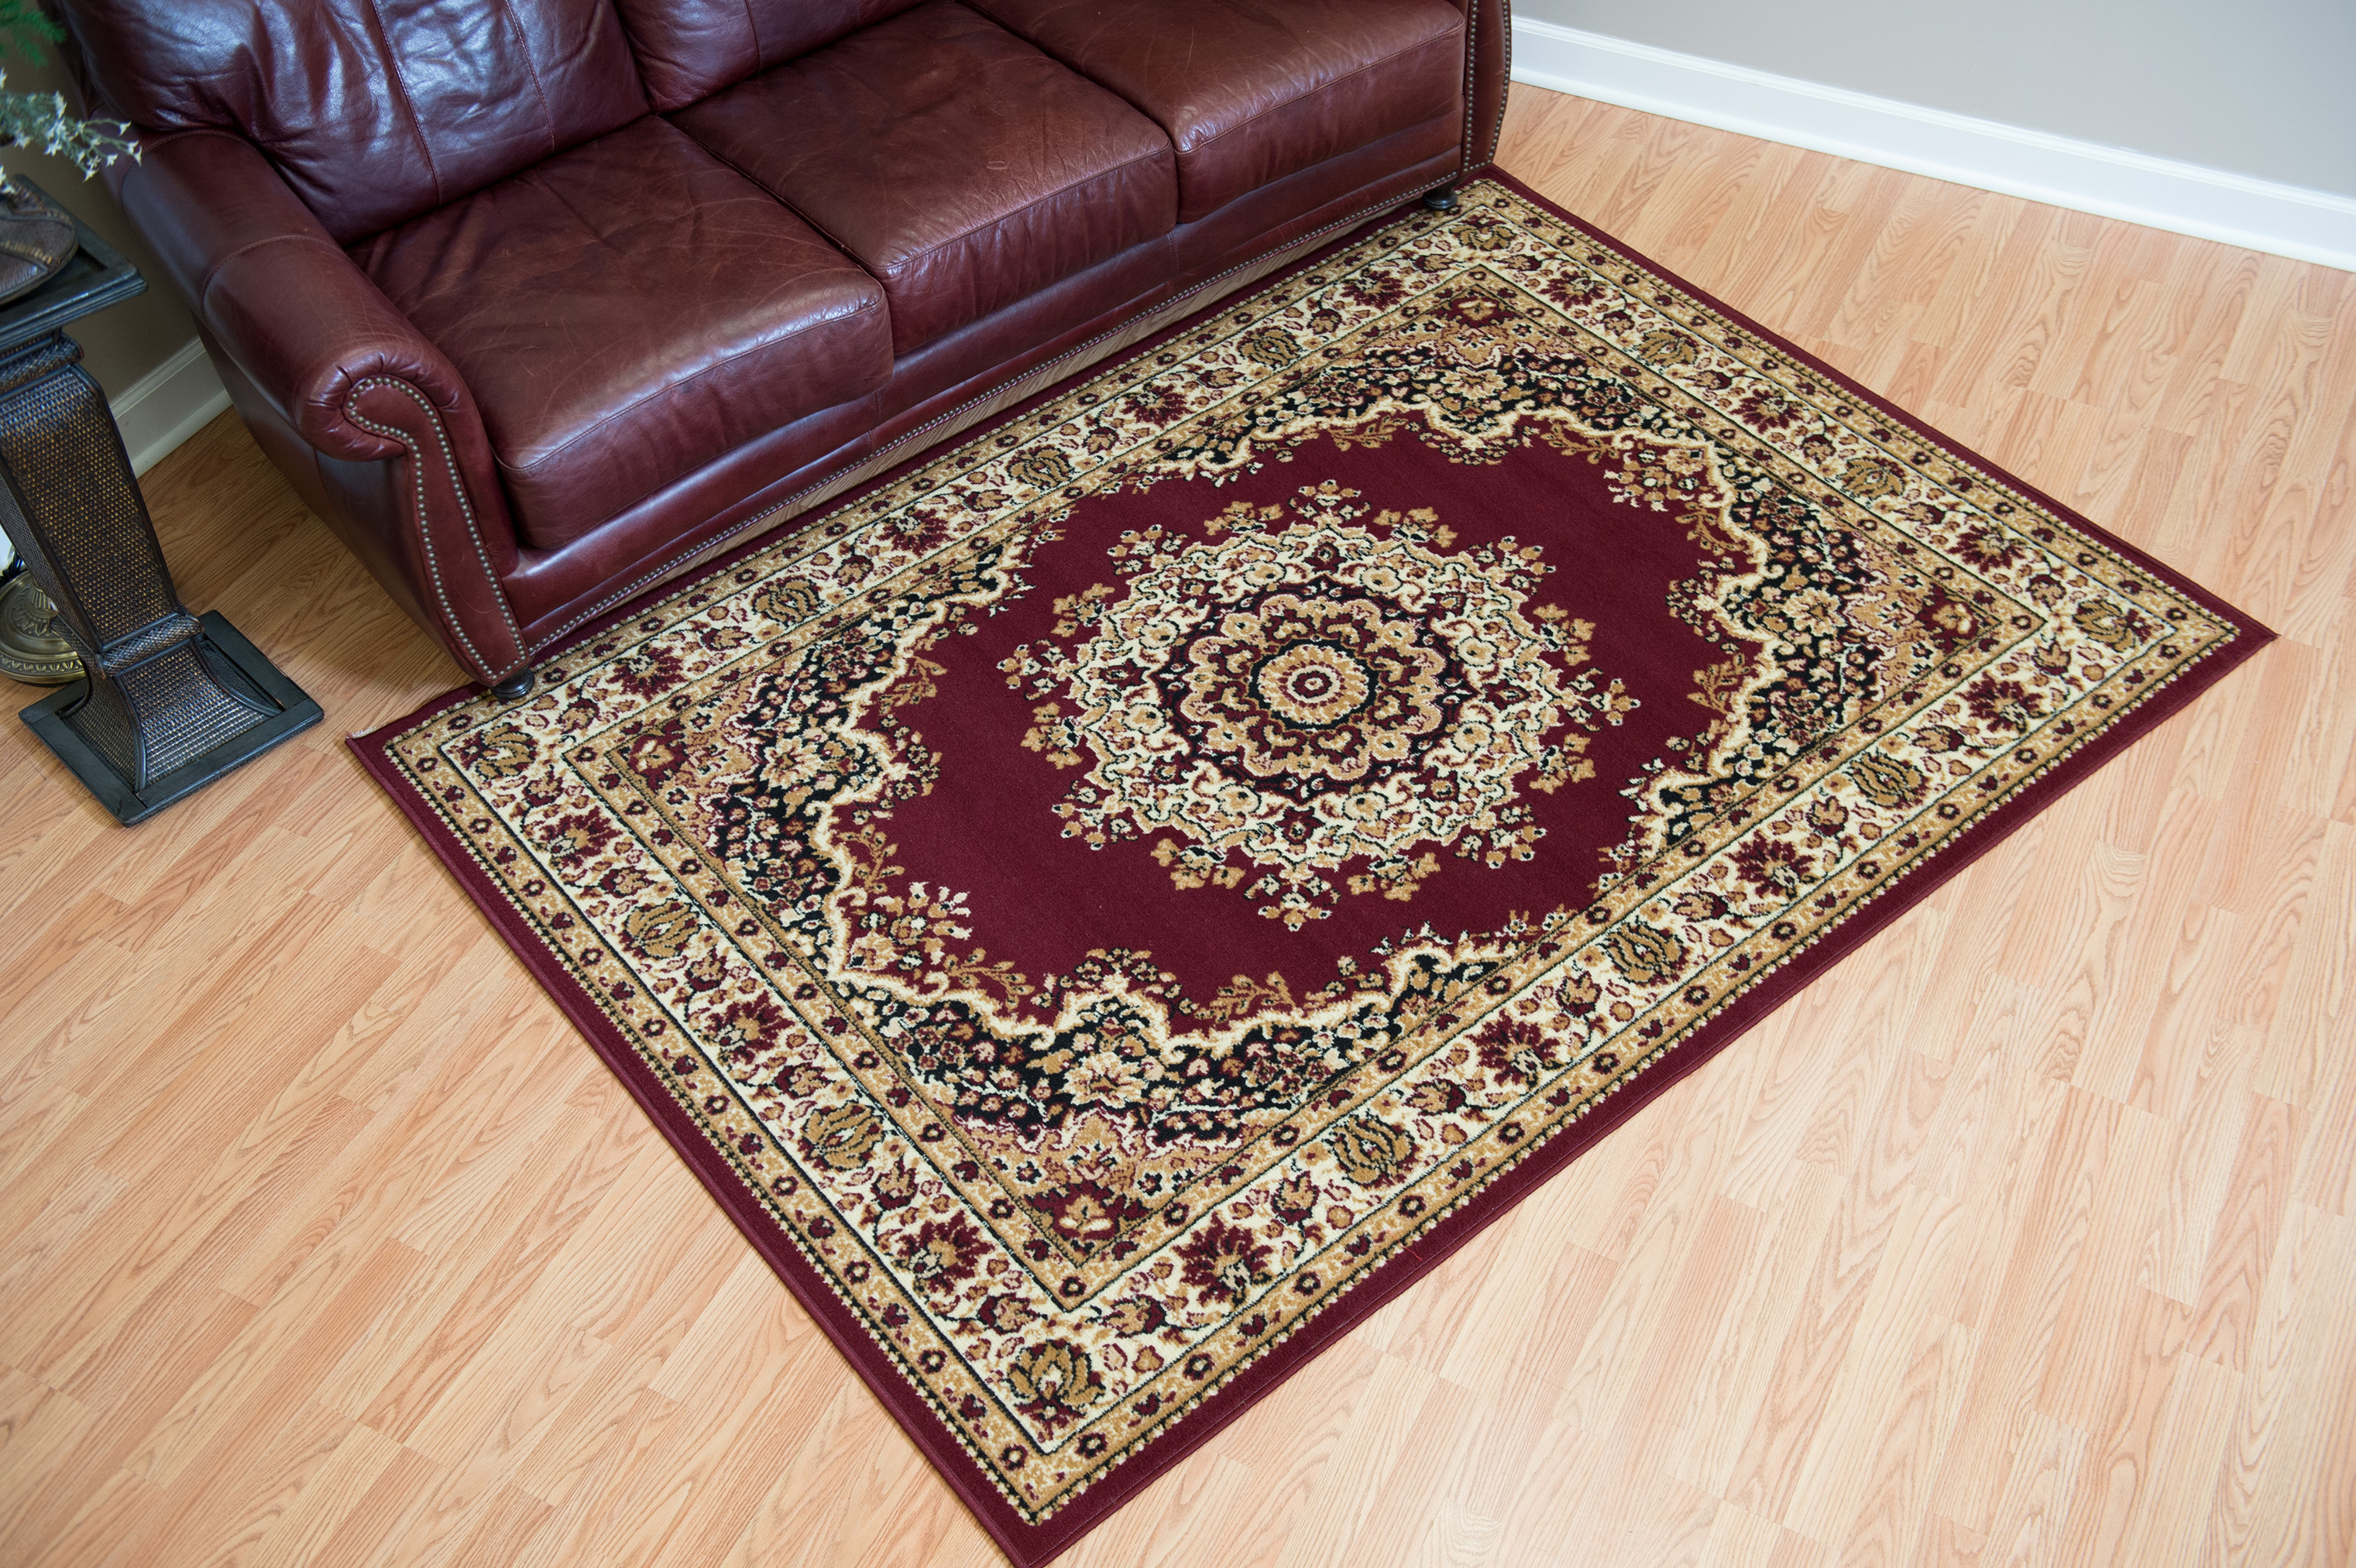 Designer Home Soft Traditional Oriental Area Rug with Center Medallion - Actual Size: 2' 3" x 7' 2" Rectangle (Burgundy) - image 1 of 5